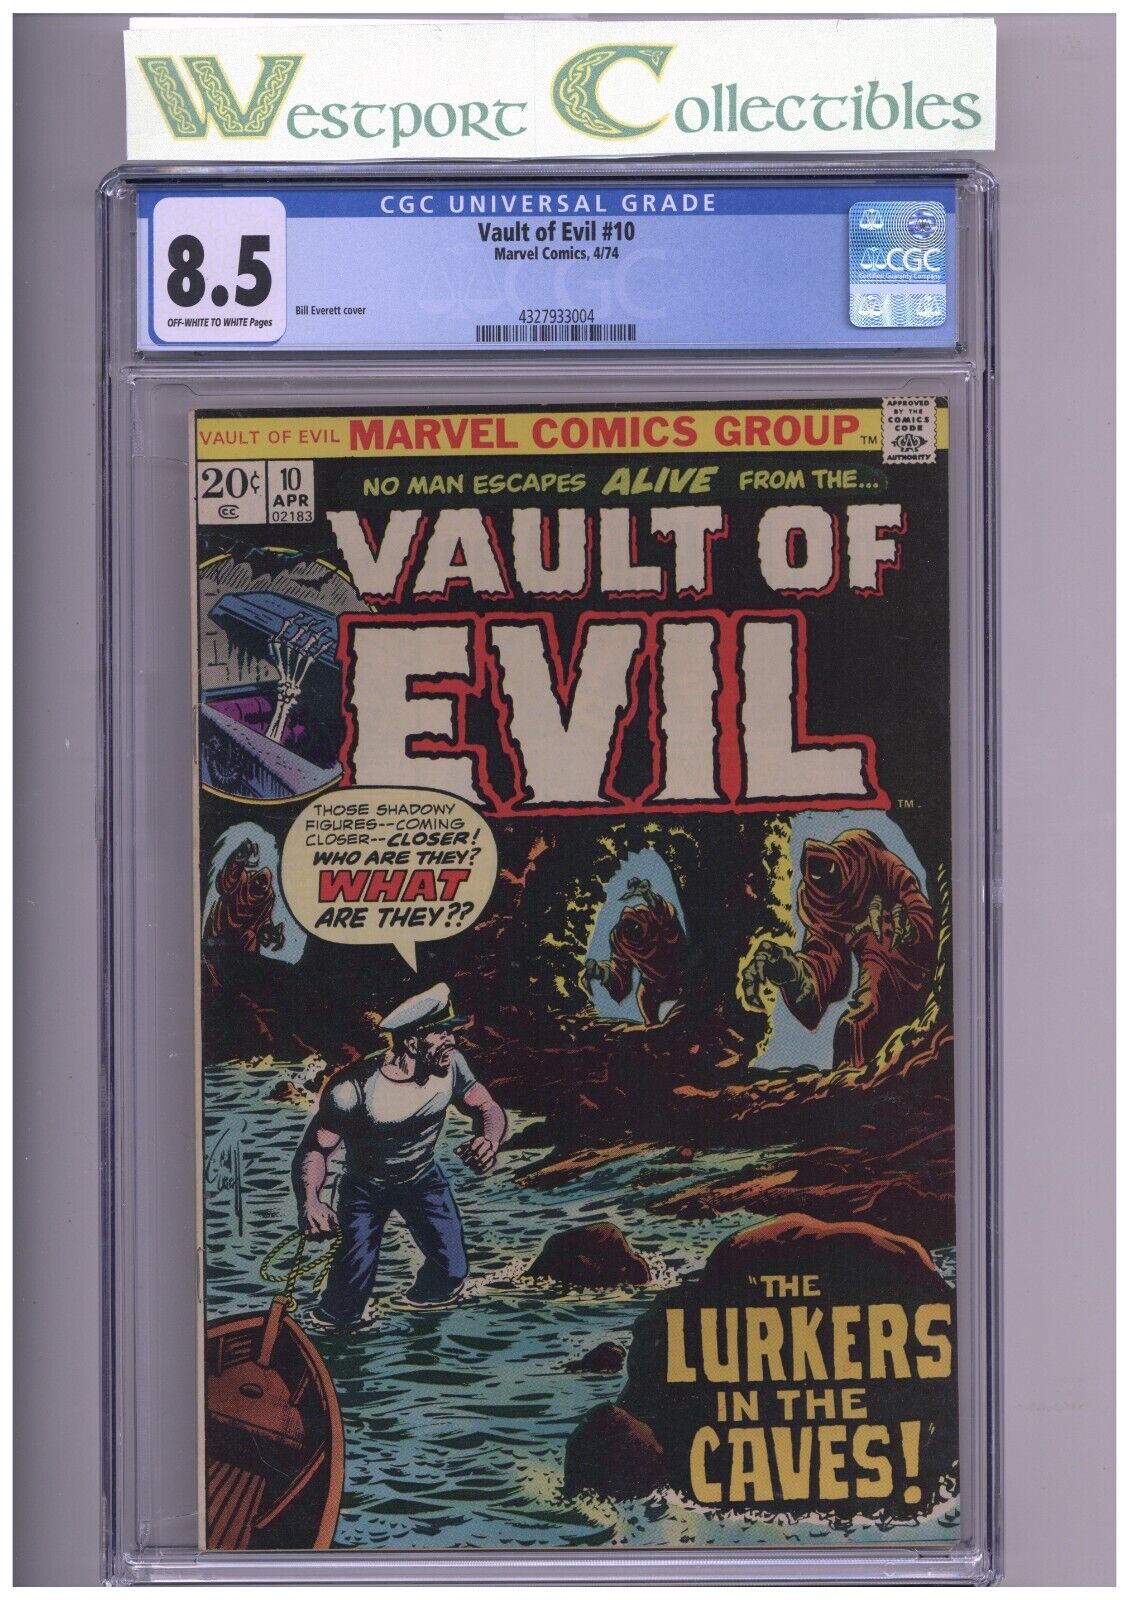 VAULT OF EVIL 10  CGC 85 OWTWP  19740 BILL EVERETTE COVER  AMAZING CONDITION